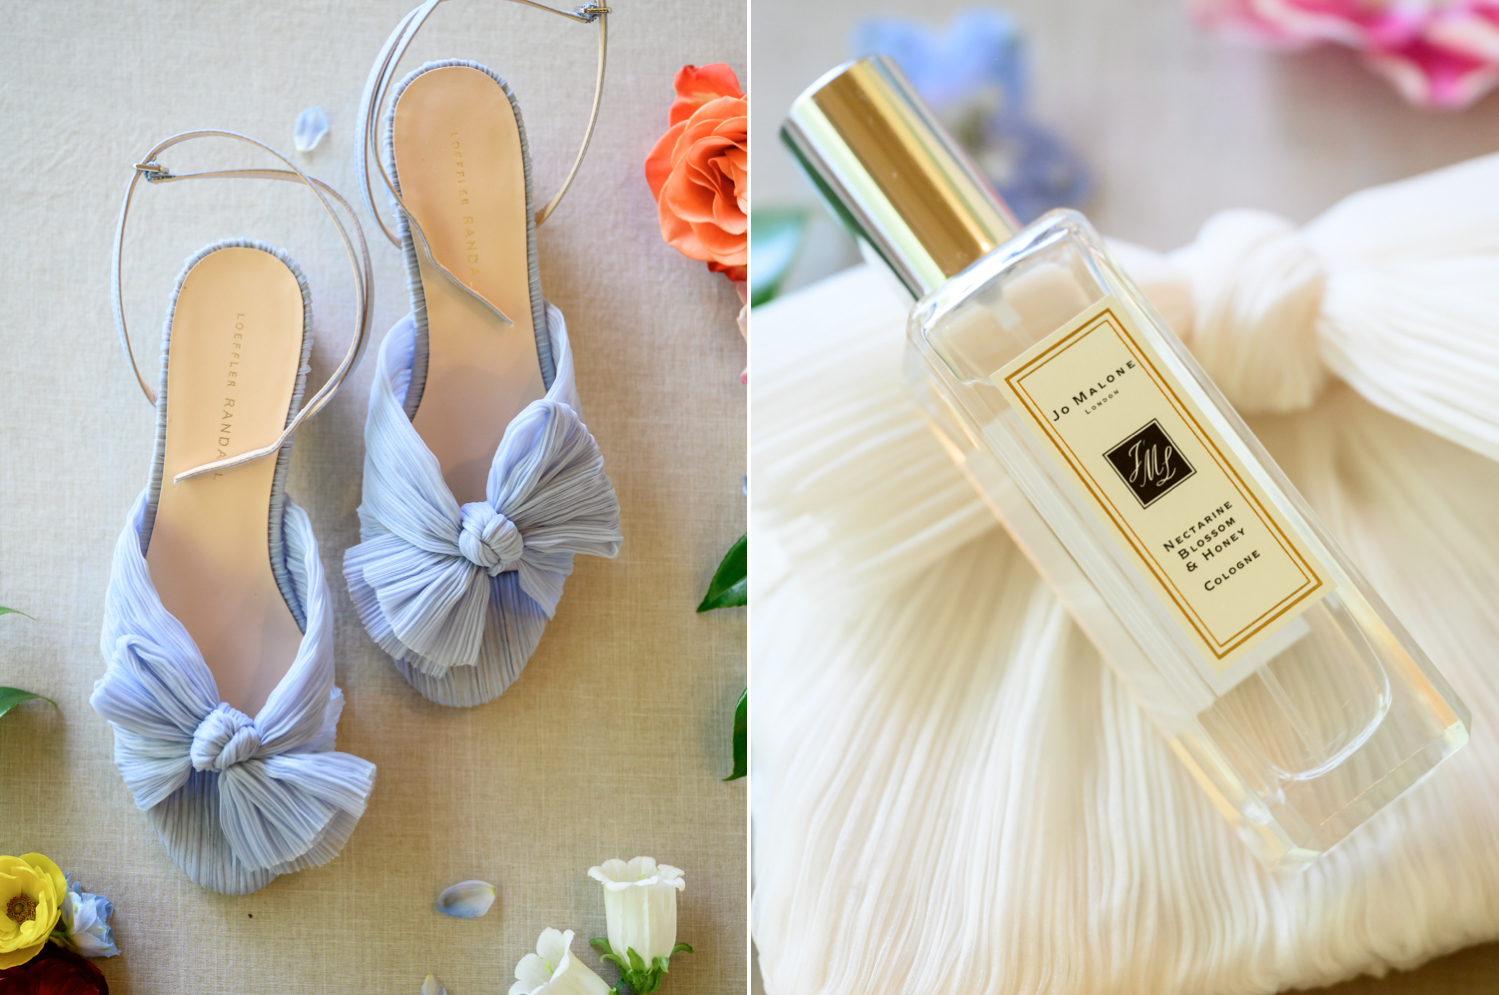 Blue wedding shoes with bows and Jo Malone perfume bottle 